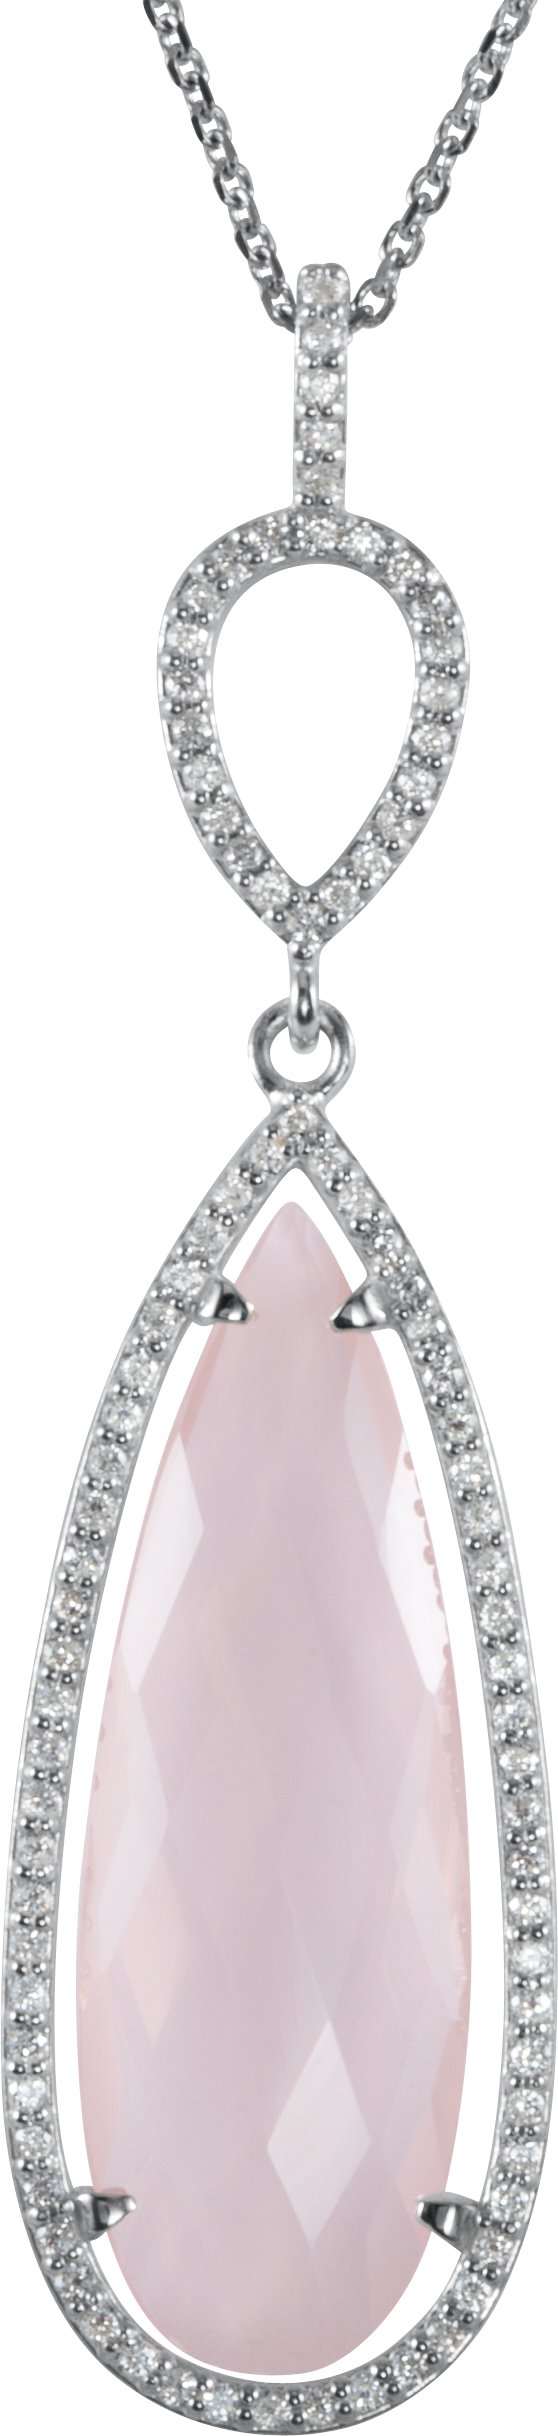 Sterling Silver Rose Quartz and .375 CTW Diamond Halo Style 18 inch Necklace Ref 3627884